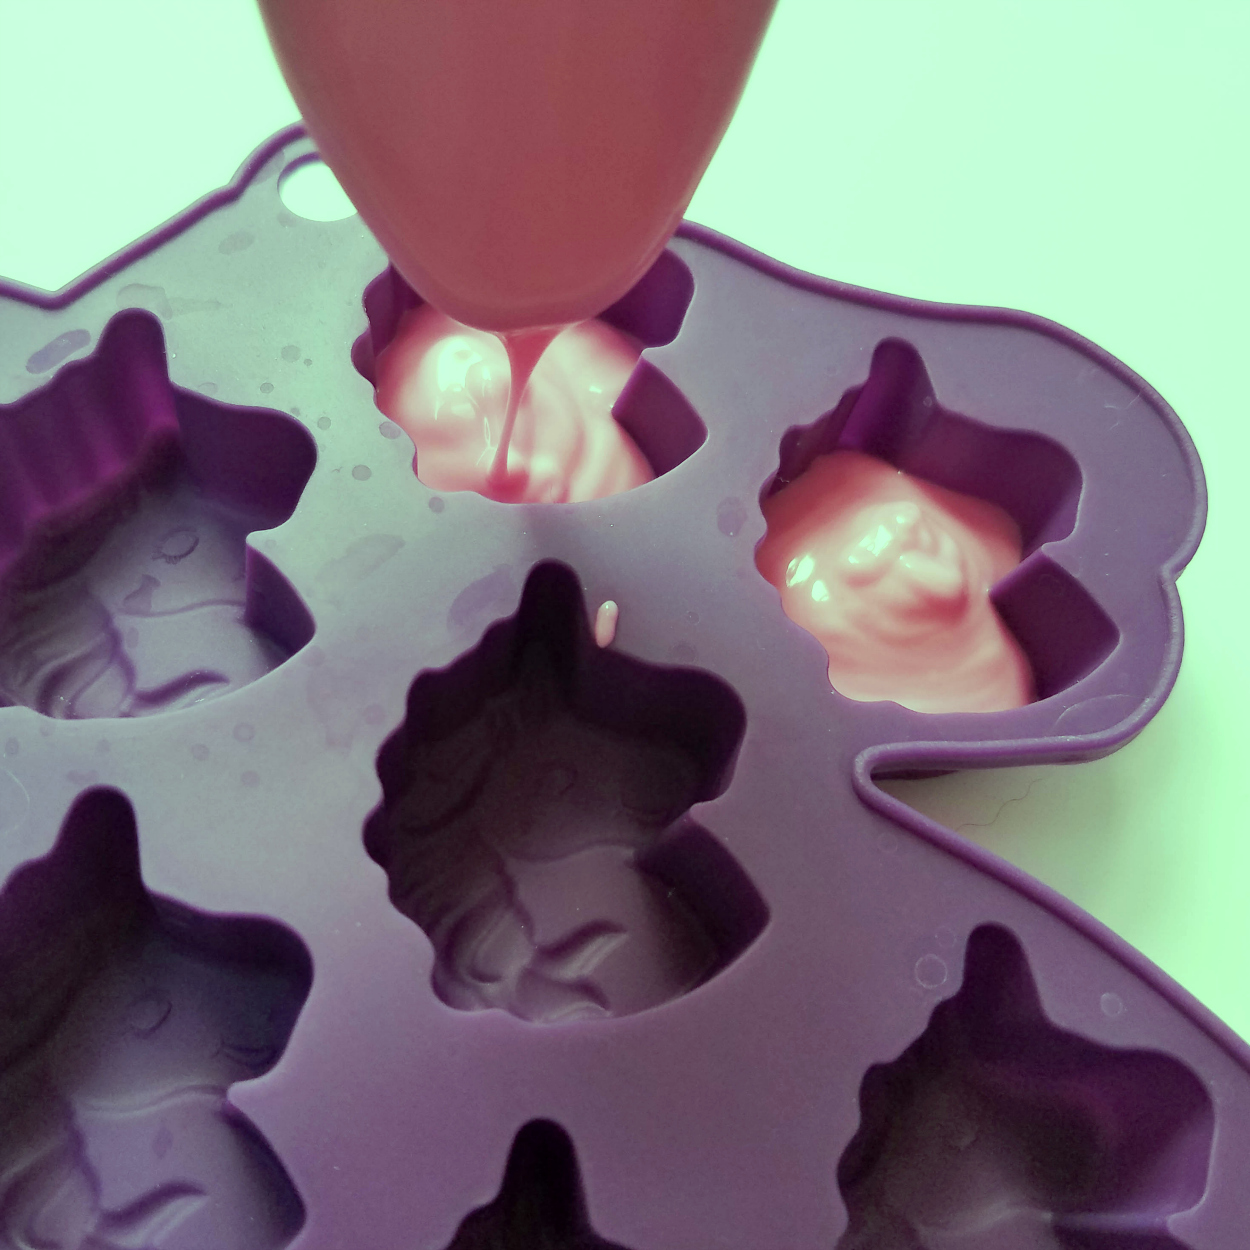 filling silicone candy mold with pink melted candy